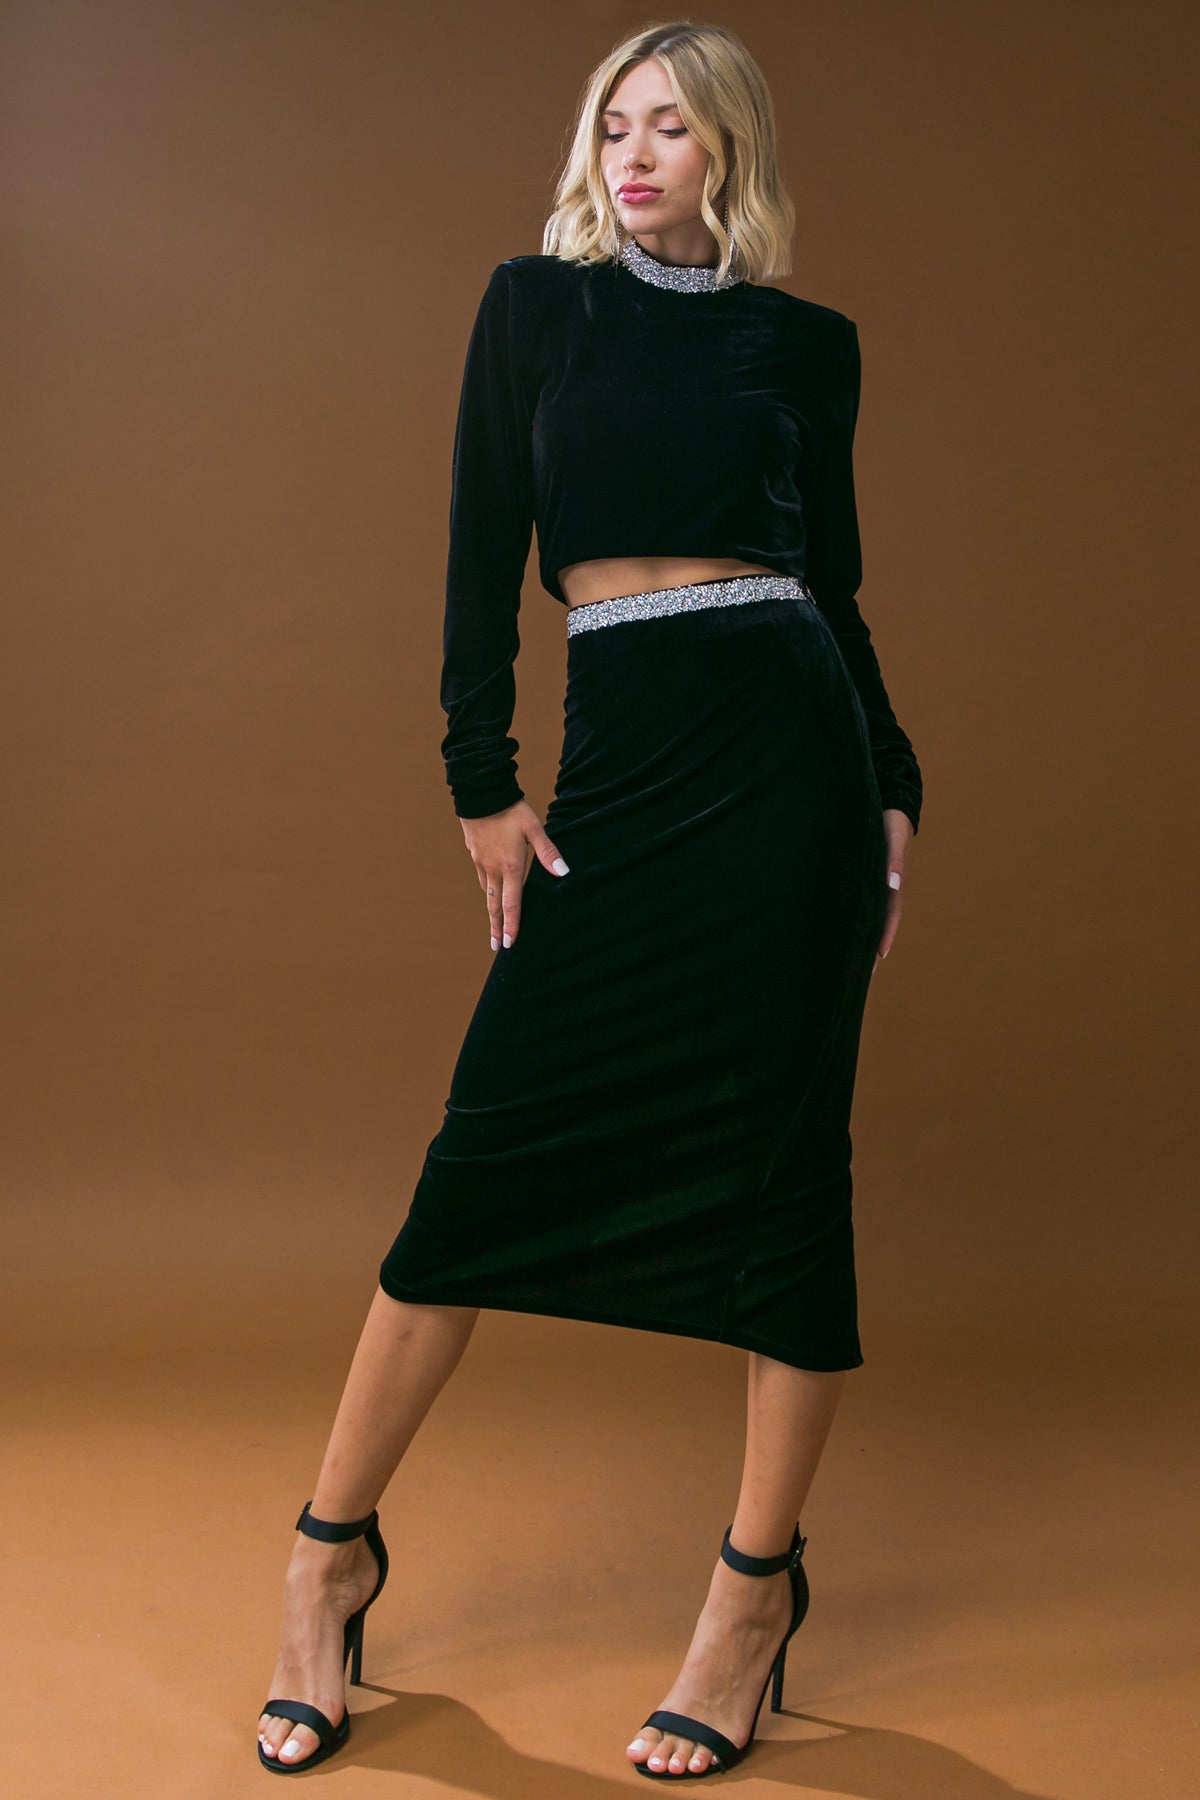 SO GET THIS VELVET TOP AND SKIRT